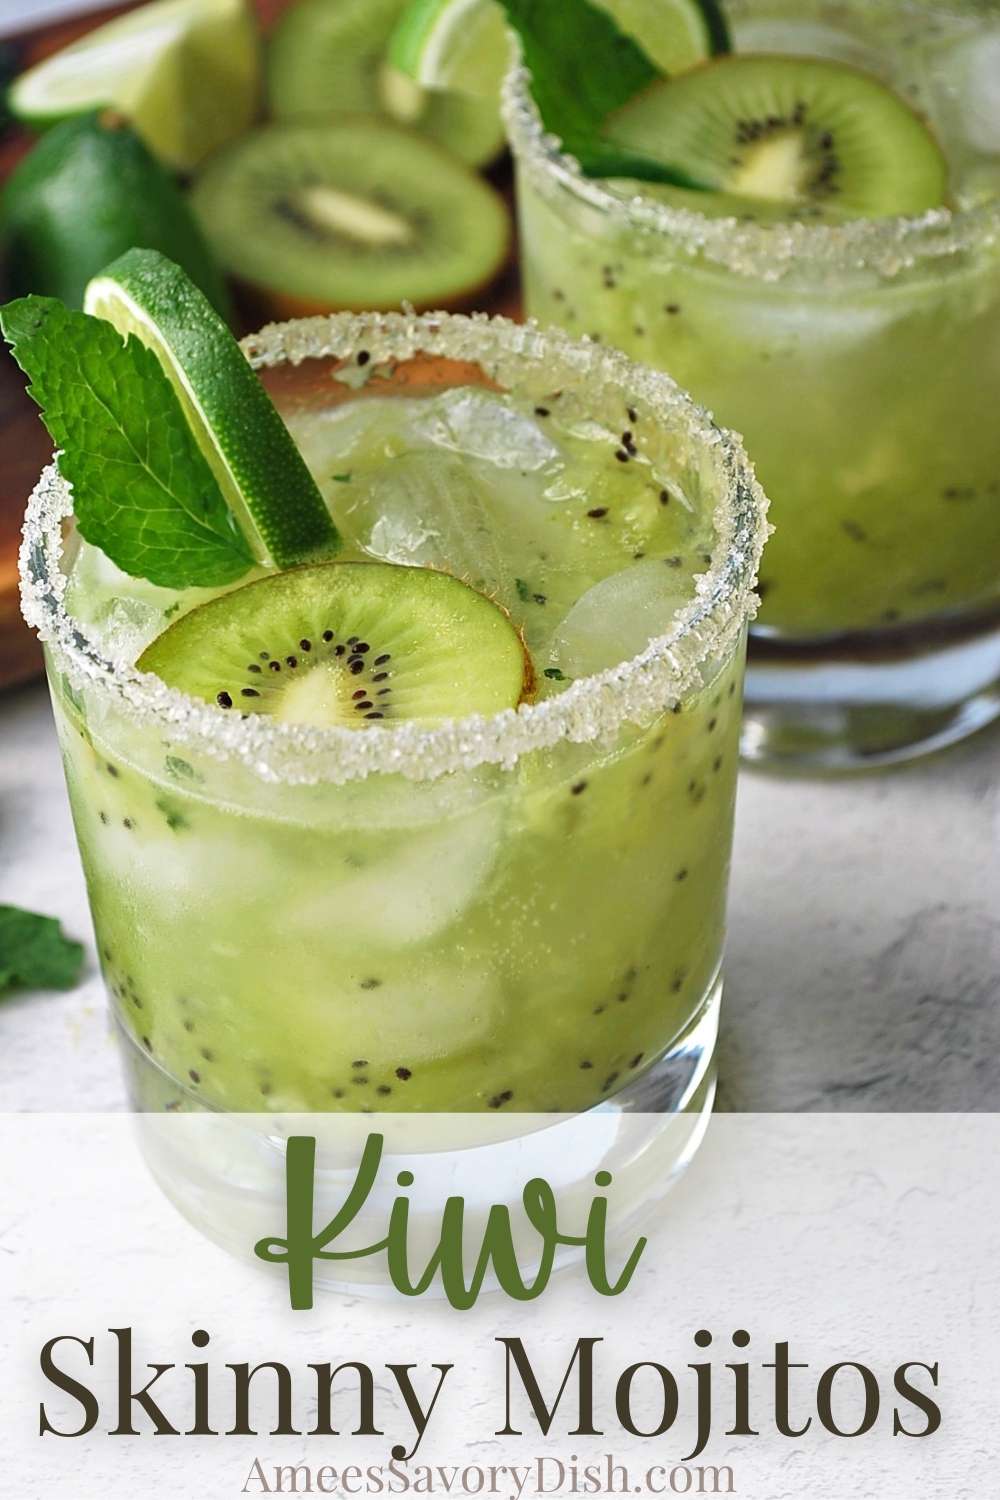 This kiwi skinny mojito is a delicious lightened-up mojito recipe made with fresh kiwi fruit, mint, rum, agave nectar, and club soda. via @Ameessavorydish